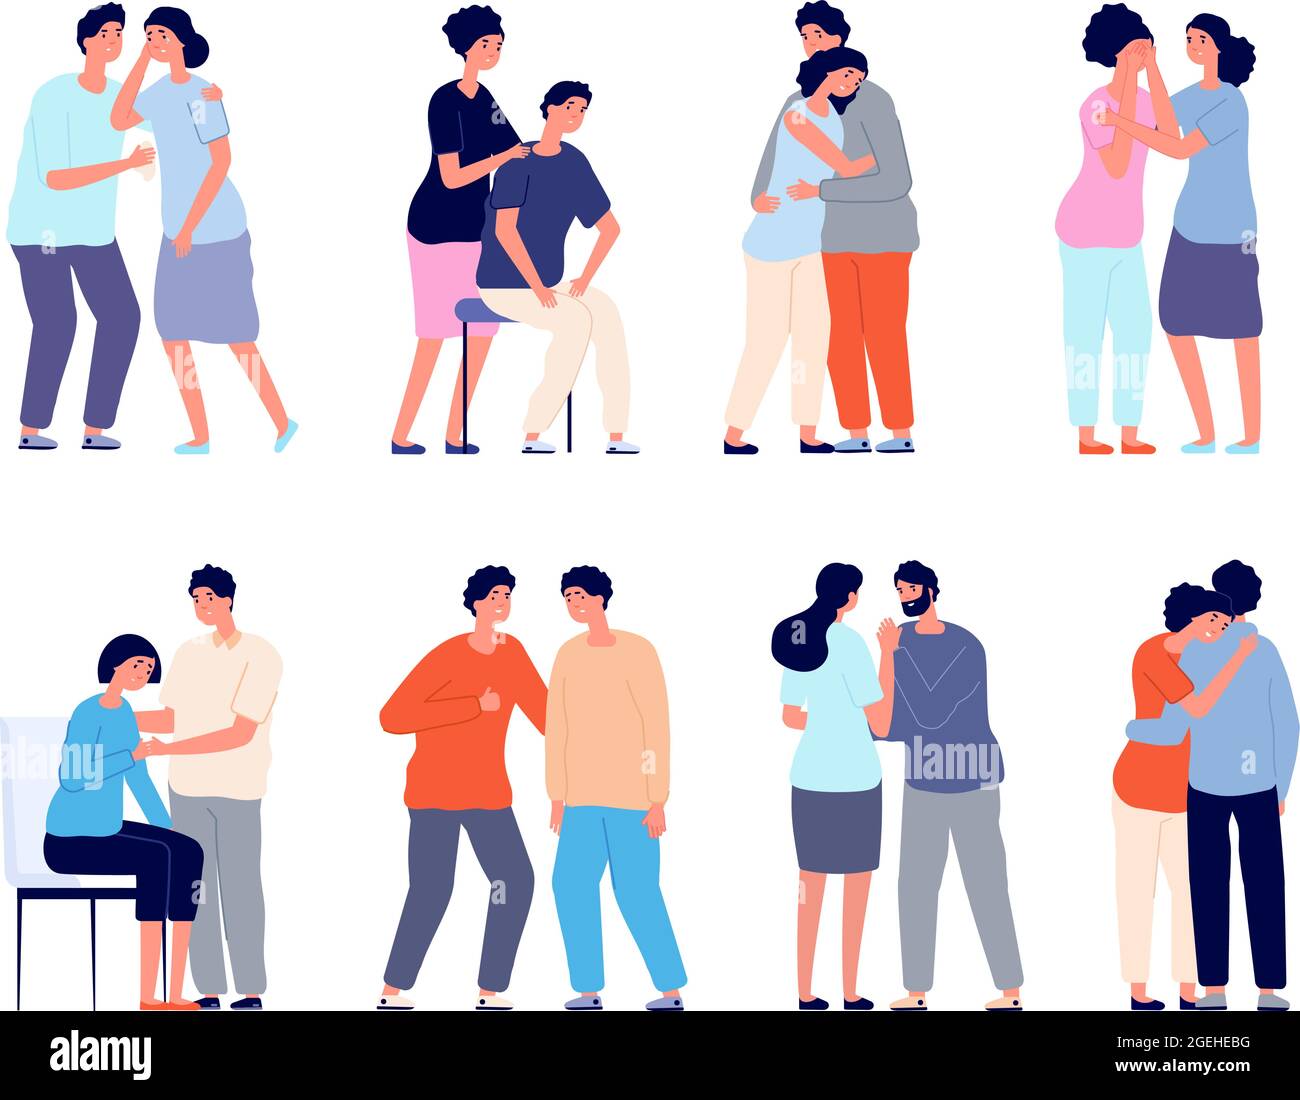 People comforting. Man support, comforted shoulder hugs or emotional characters. Persons together, empathy girl and comfort utter vector set Stock Vector